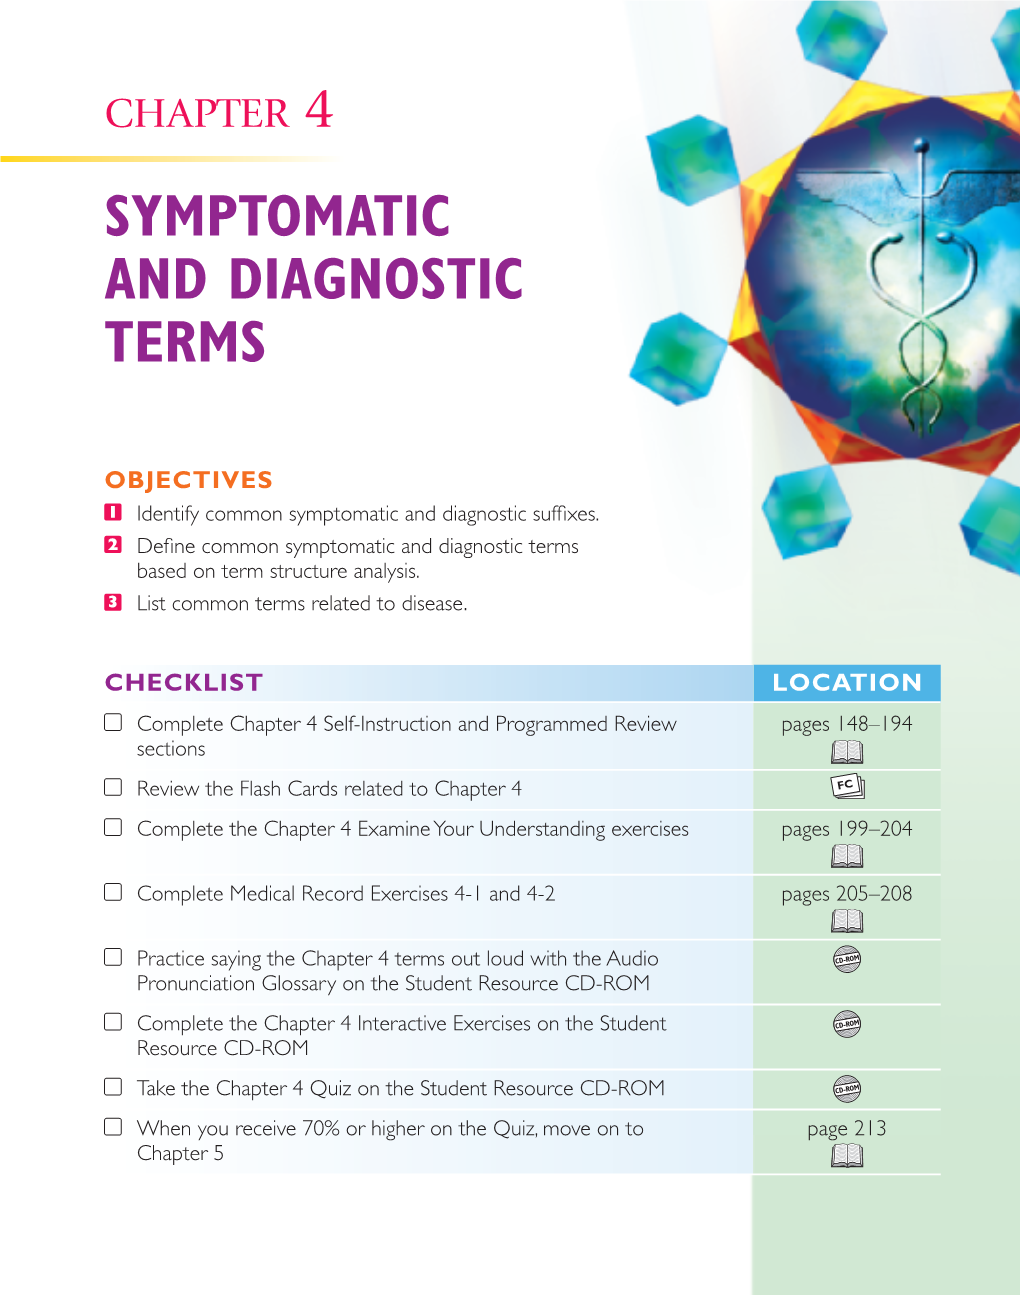 Chapter 4 Symptomatic and Diagnostic Terms